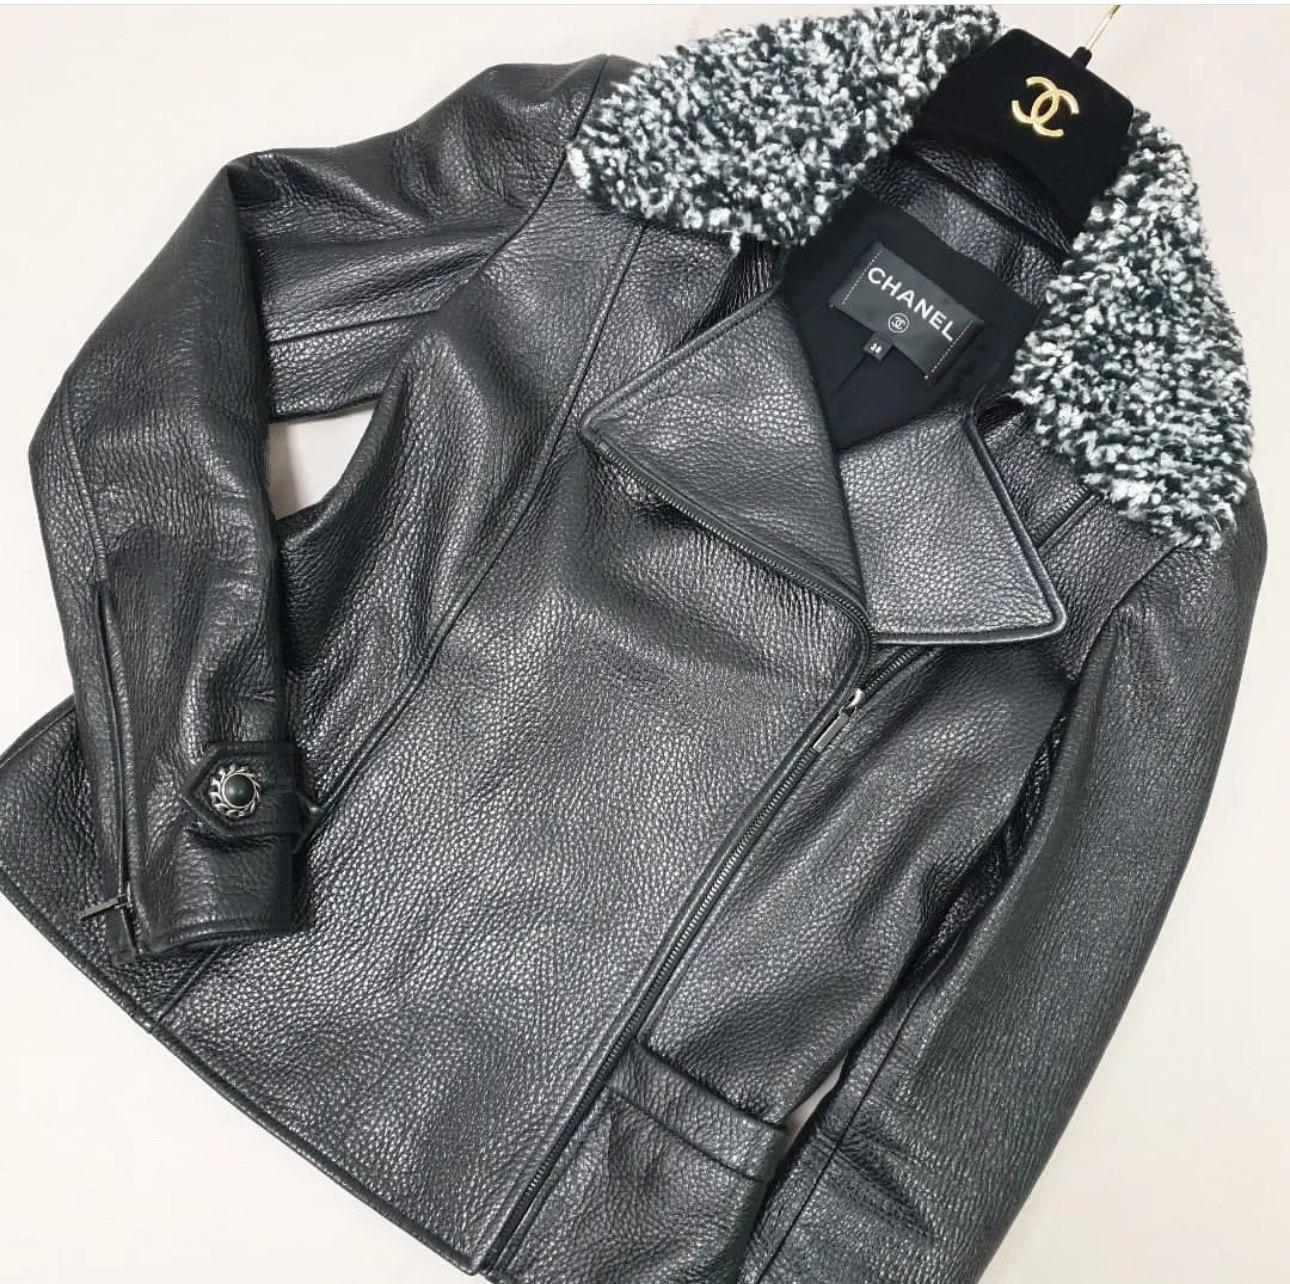 Chanel Deer Leather Tweed Collar Jacket In Excellent Condition For Sale In Krakow, PL